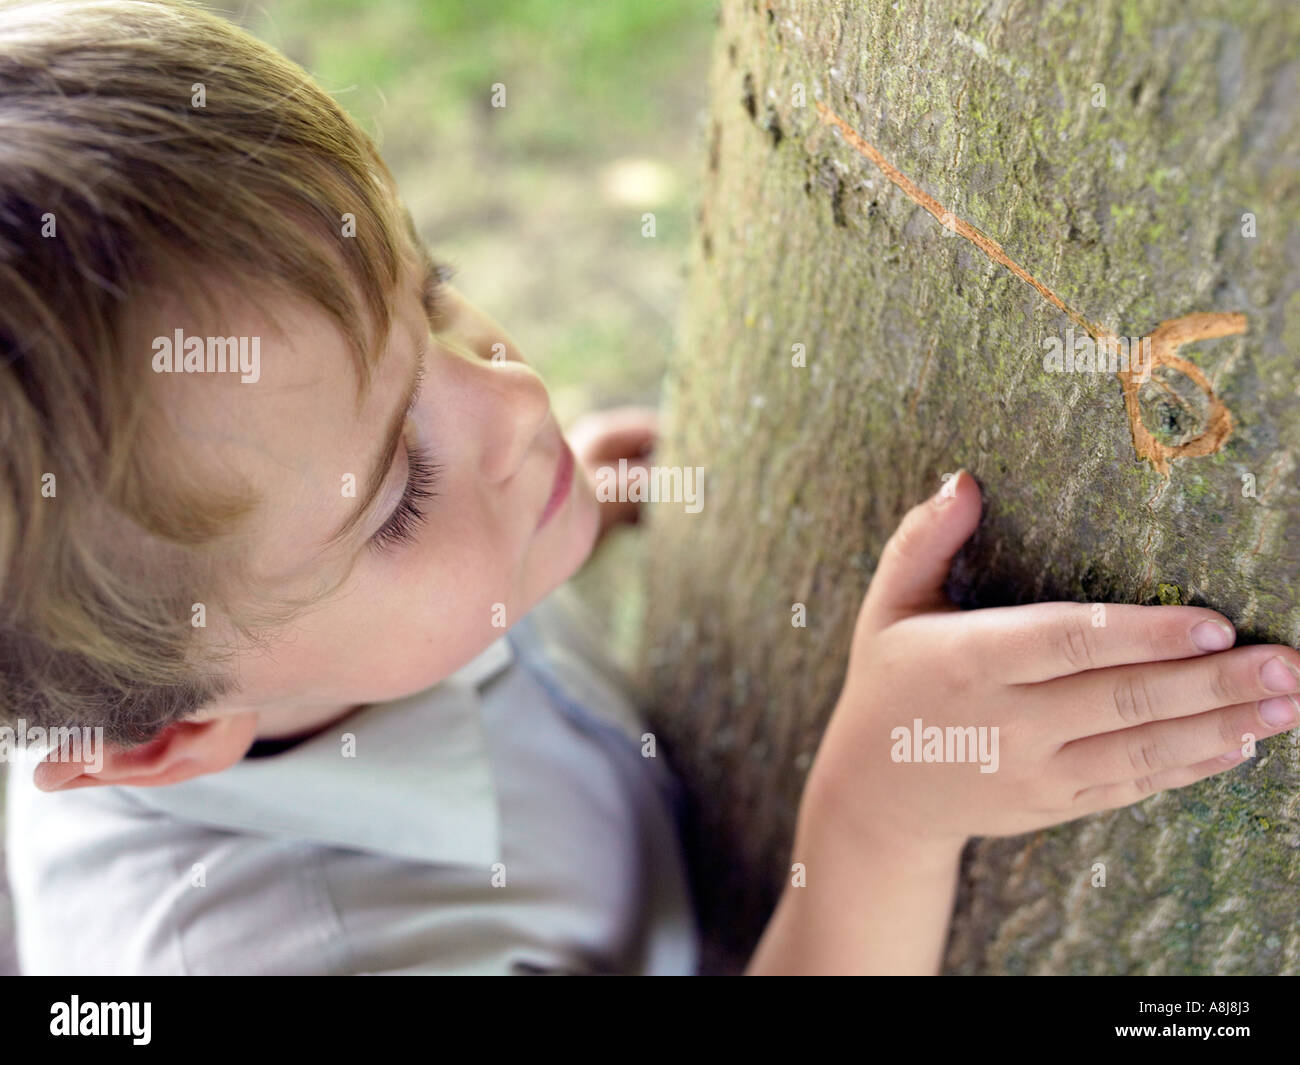 six year old boy leaning on tree with his height and age engraved seeing if he has grown Stock Photo